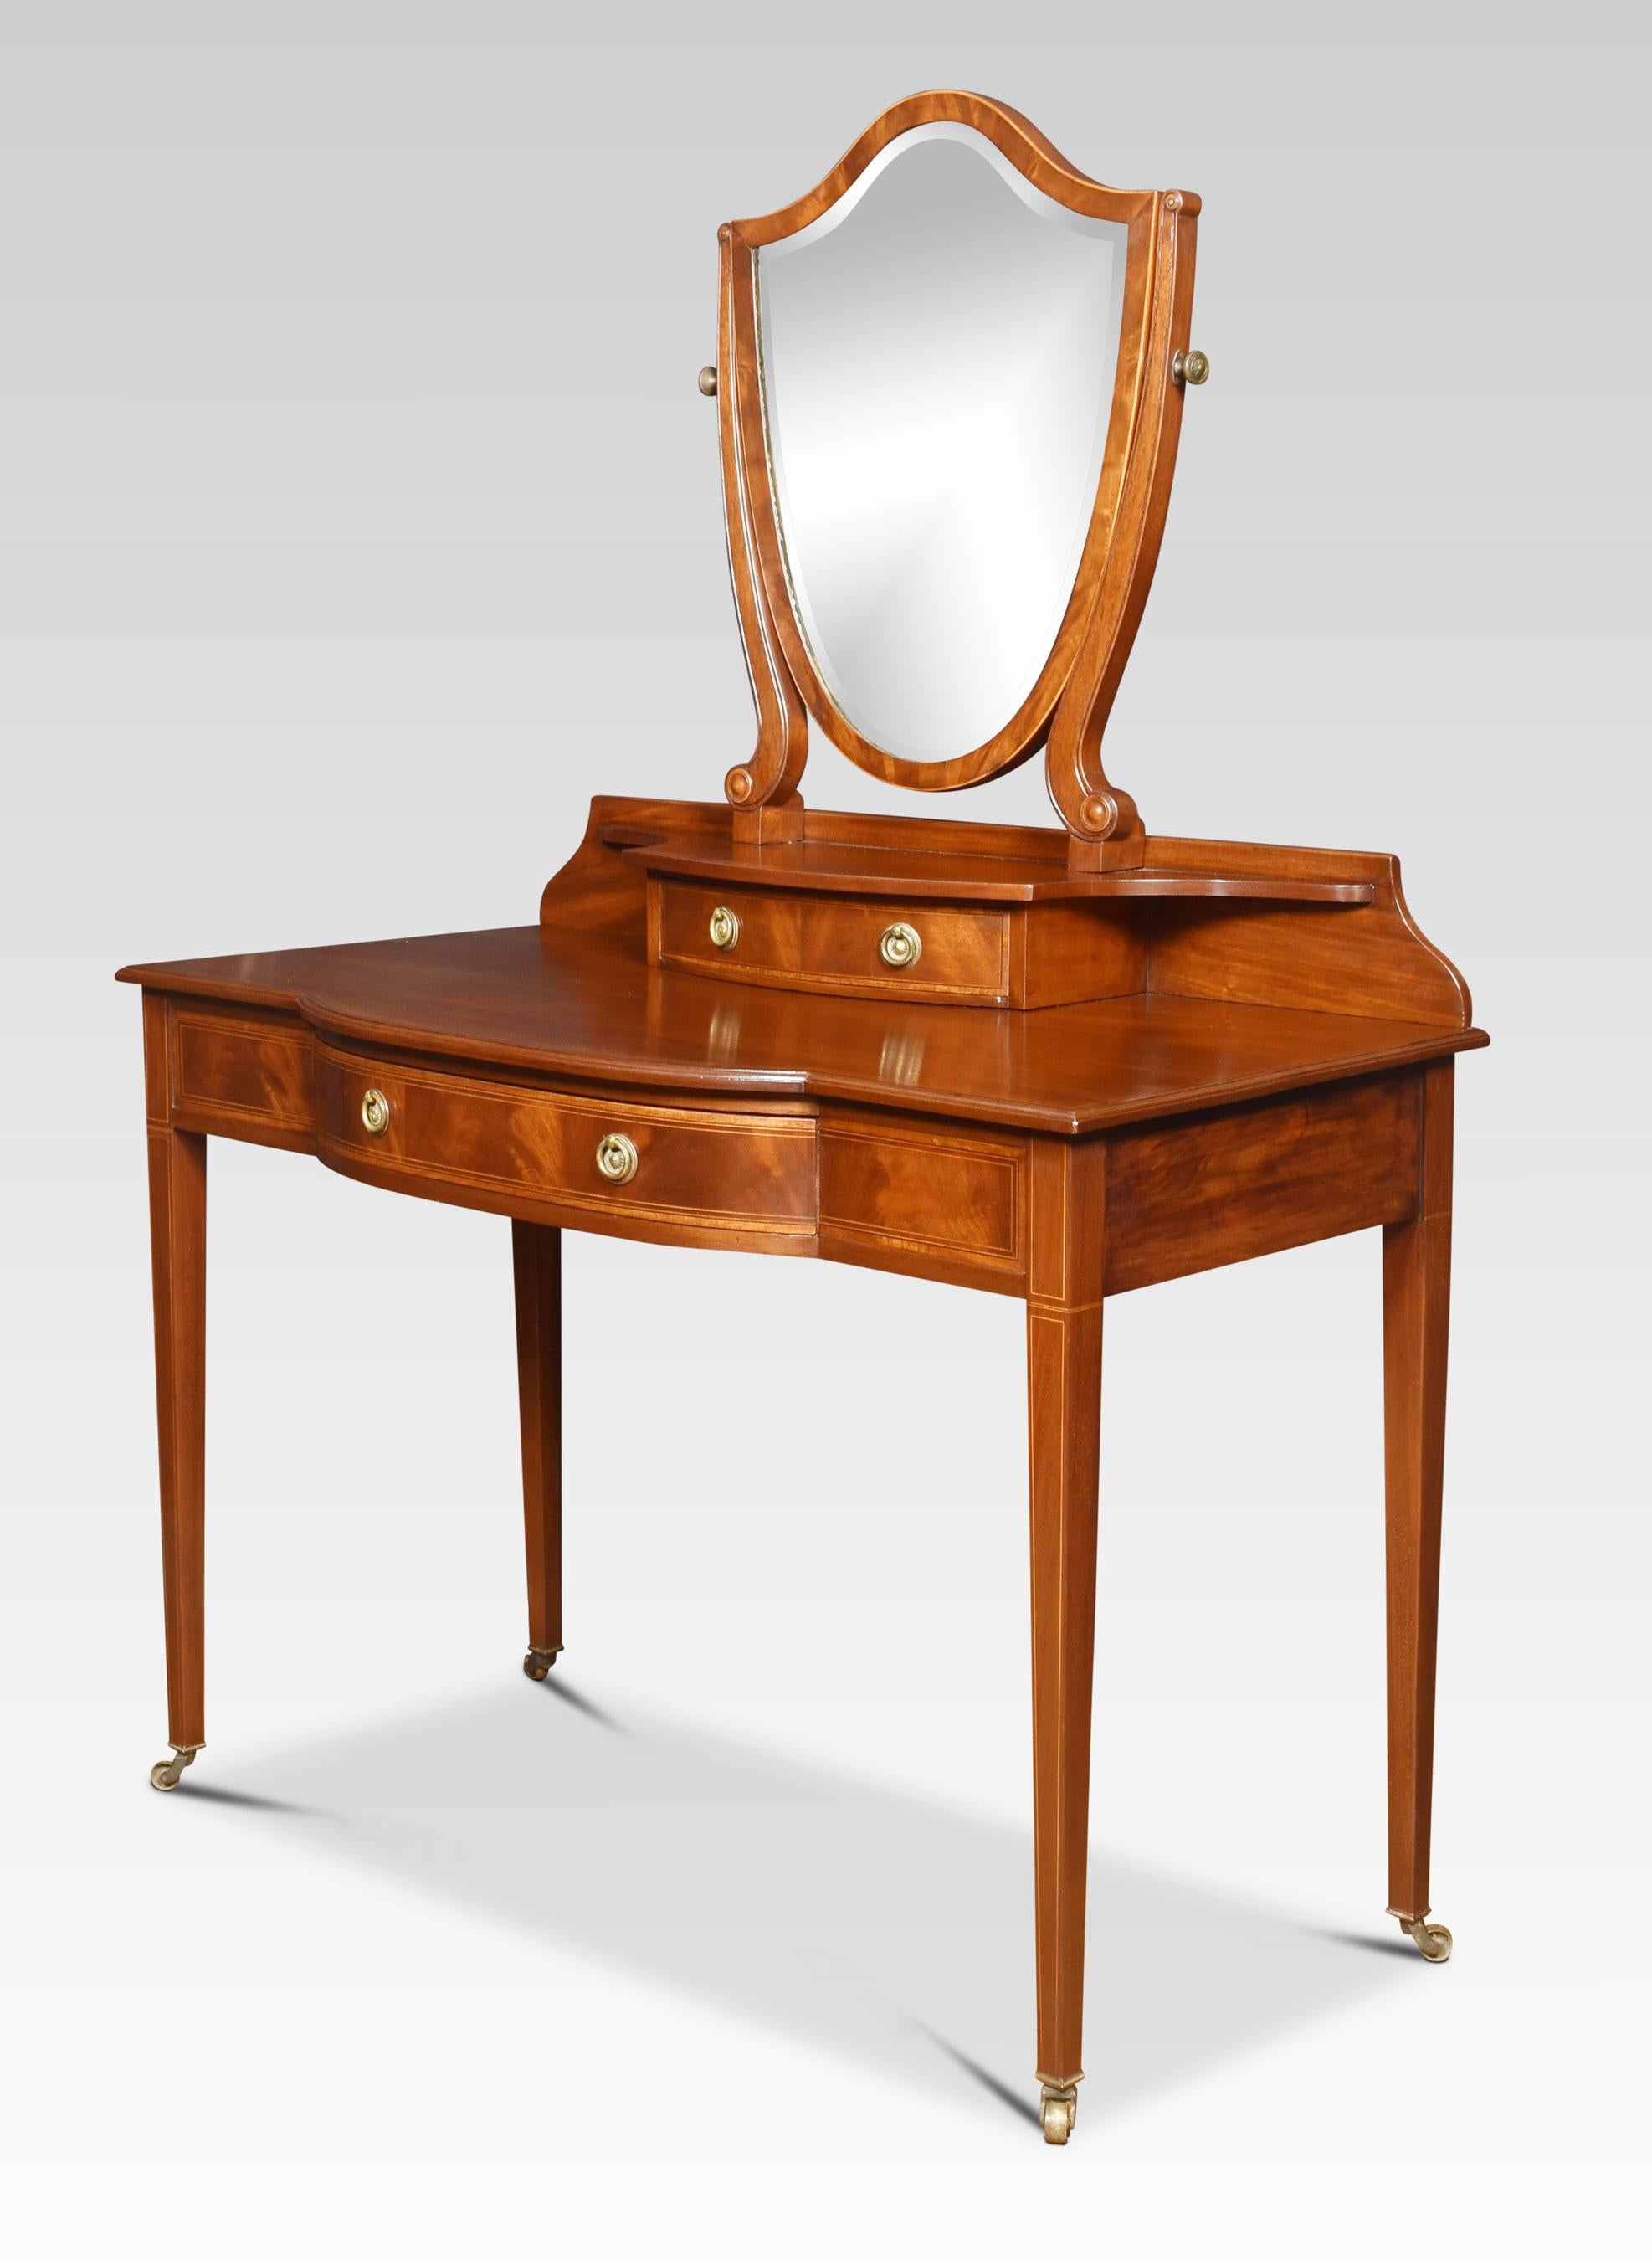 Mahogany dressing table the original bevelled mirror plate in a moulded sheild shaped frame between shaped supports with a short drawer below. To the large mahogany, bow fronted top above a single freeze draw with brass handles. All raised up on